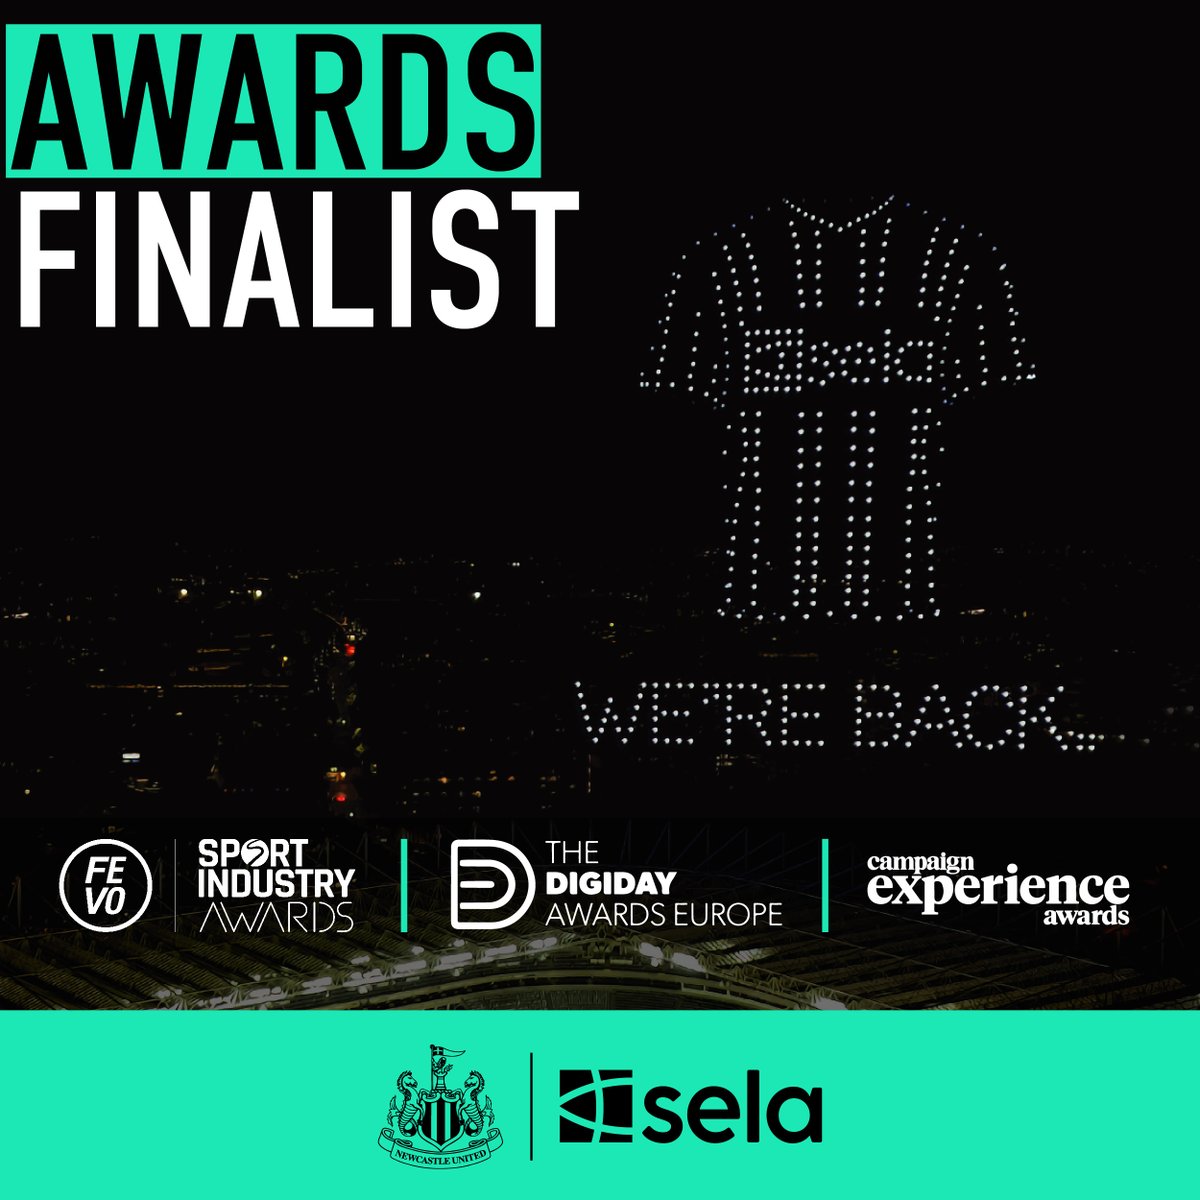 We are proud to announce that our recent campaign “We’re Back!” celebrating the return of @NUFC to the @ChampionsLeague has been shortlisted as a finalist in three major awards shows, 'Sport Industry Awards” and “The Digiday Awards Europe” under the category of Experiential